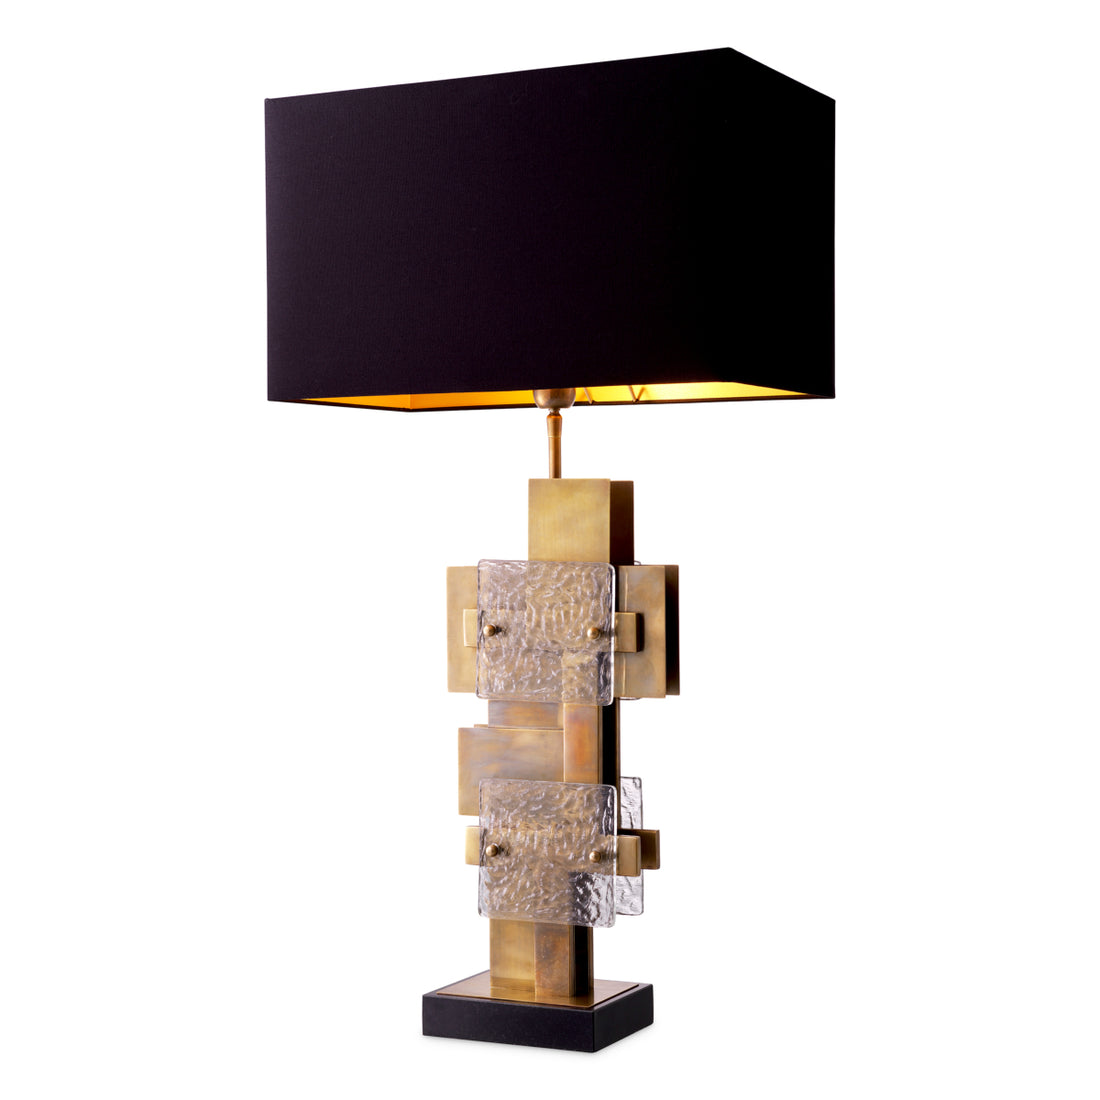 Table Lamp Langham vintage brass finish incl shade